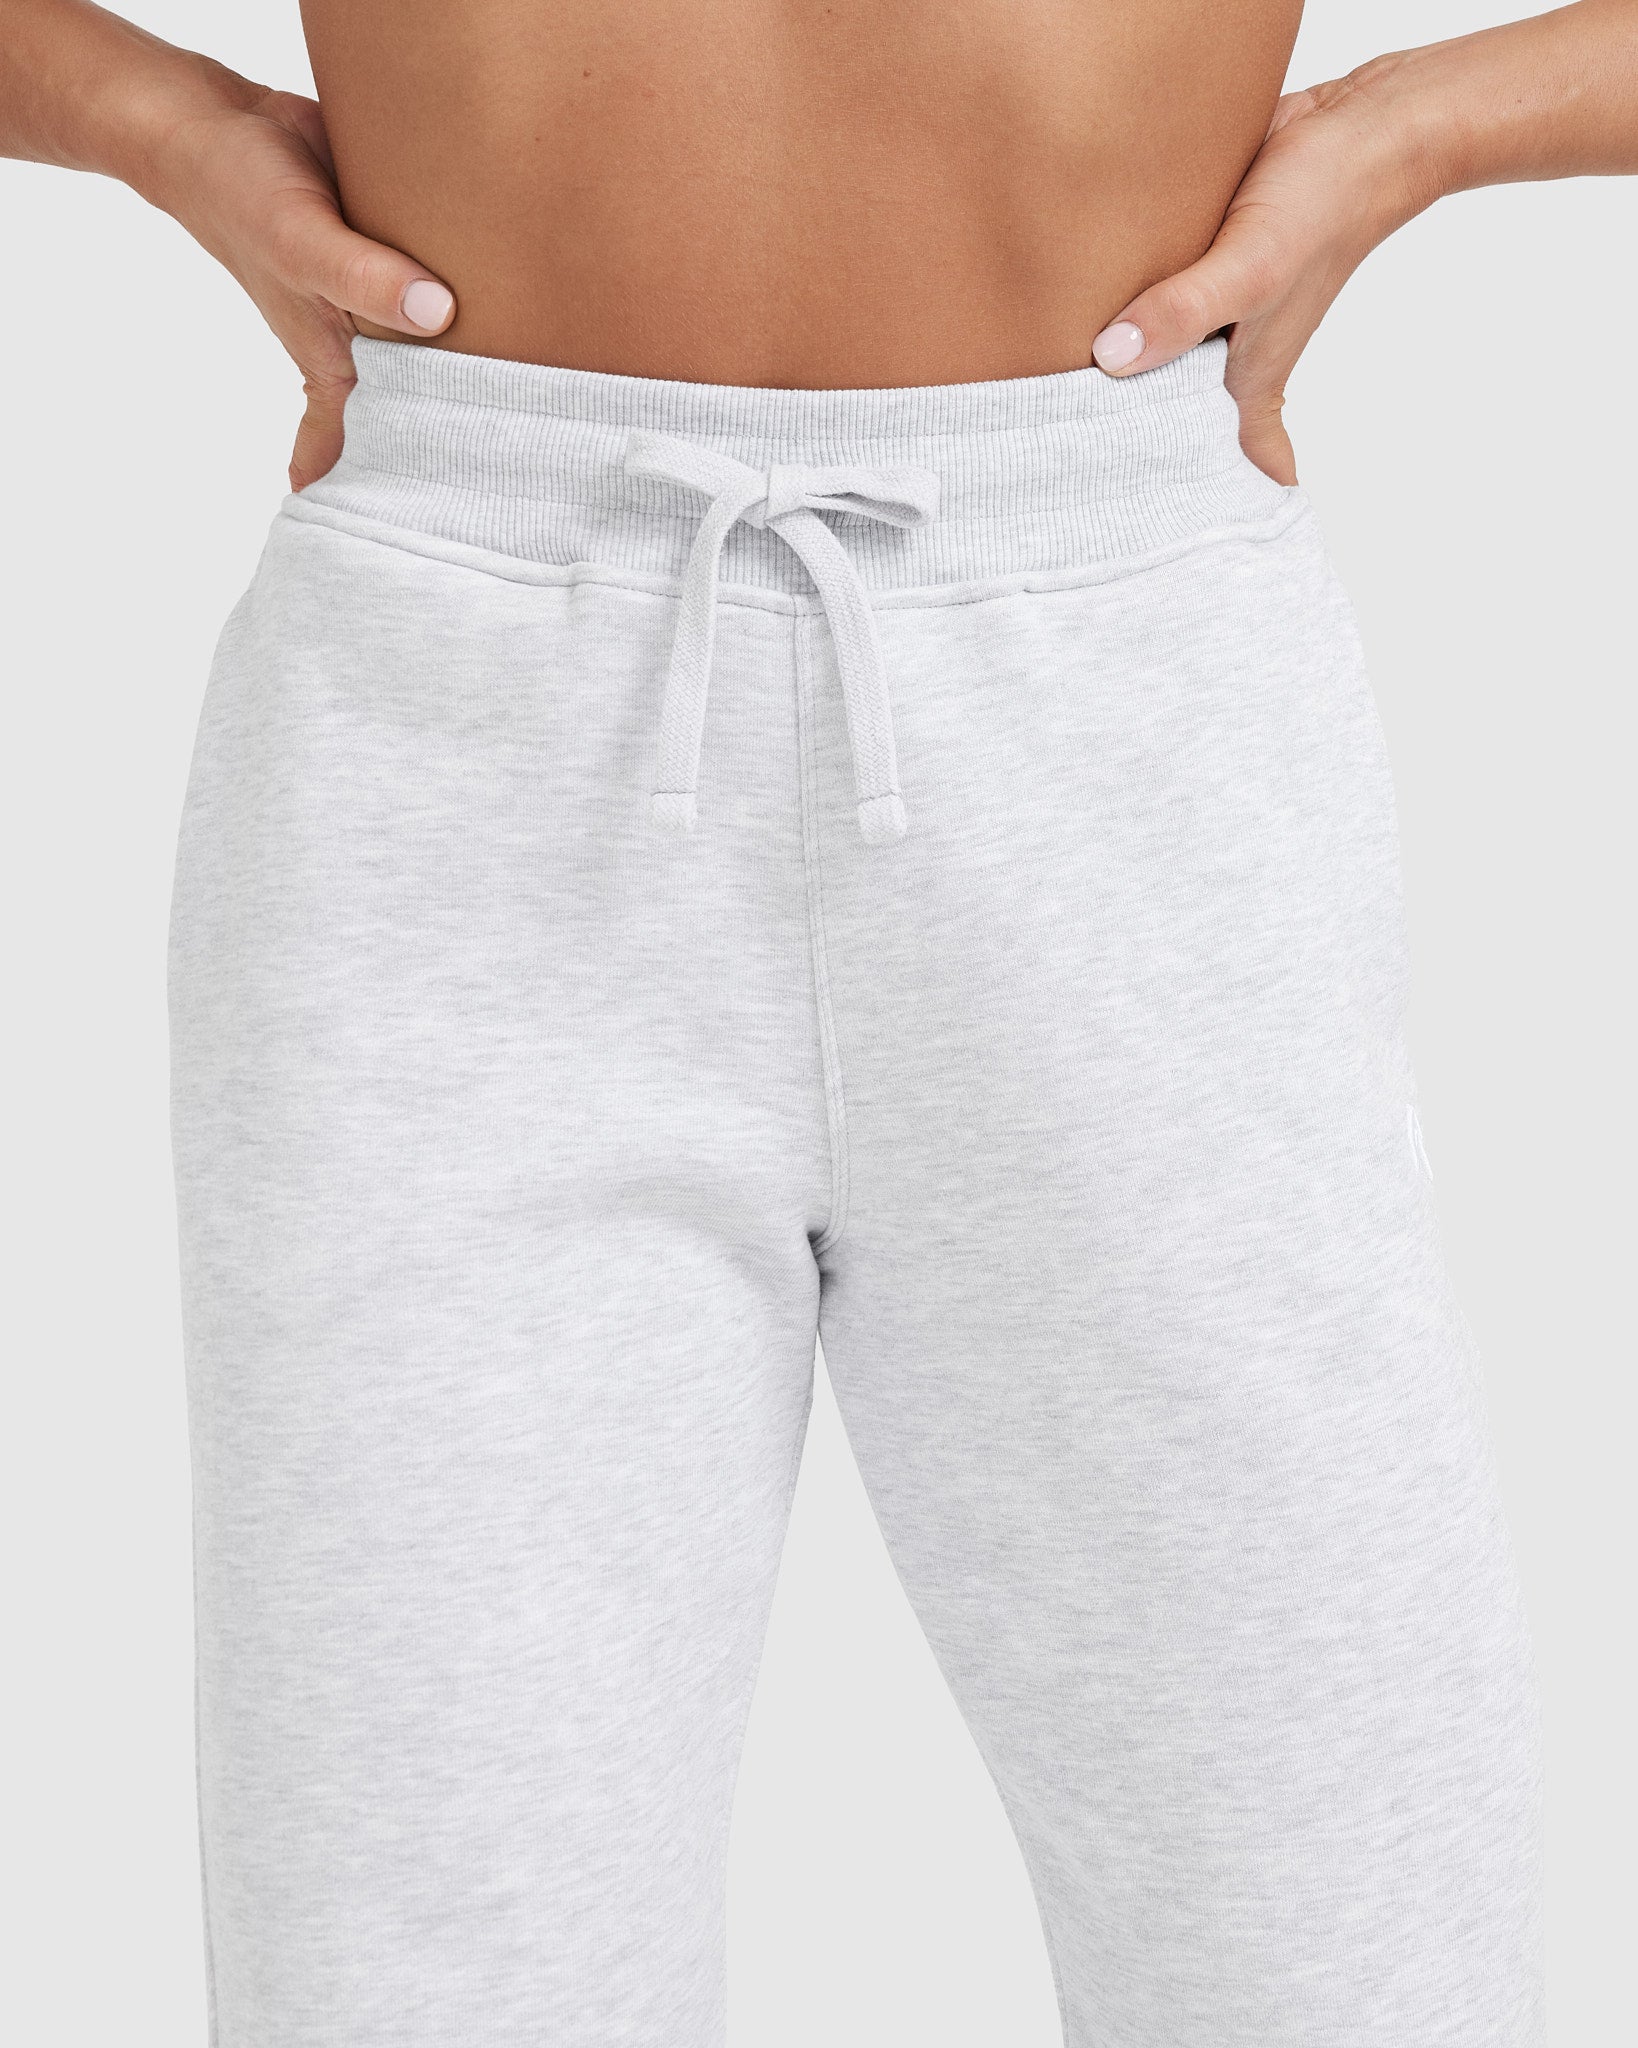 All Day Jogger Light Grey Marl | Oner Active US